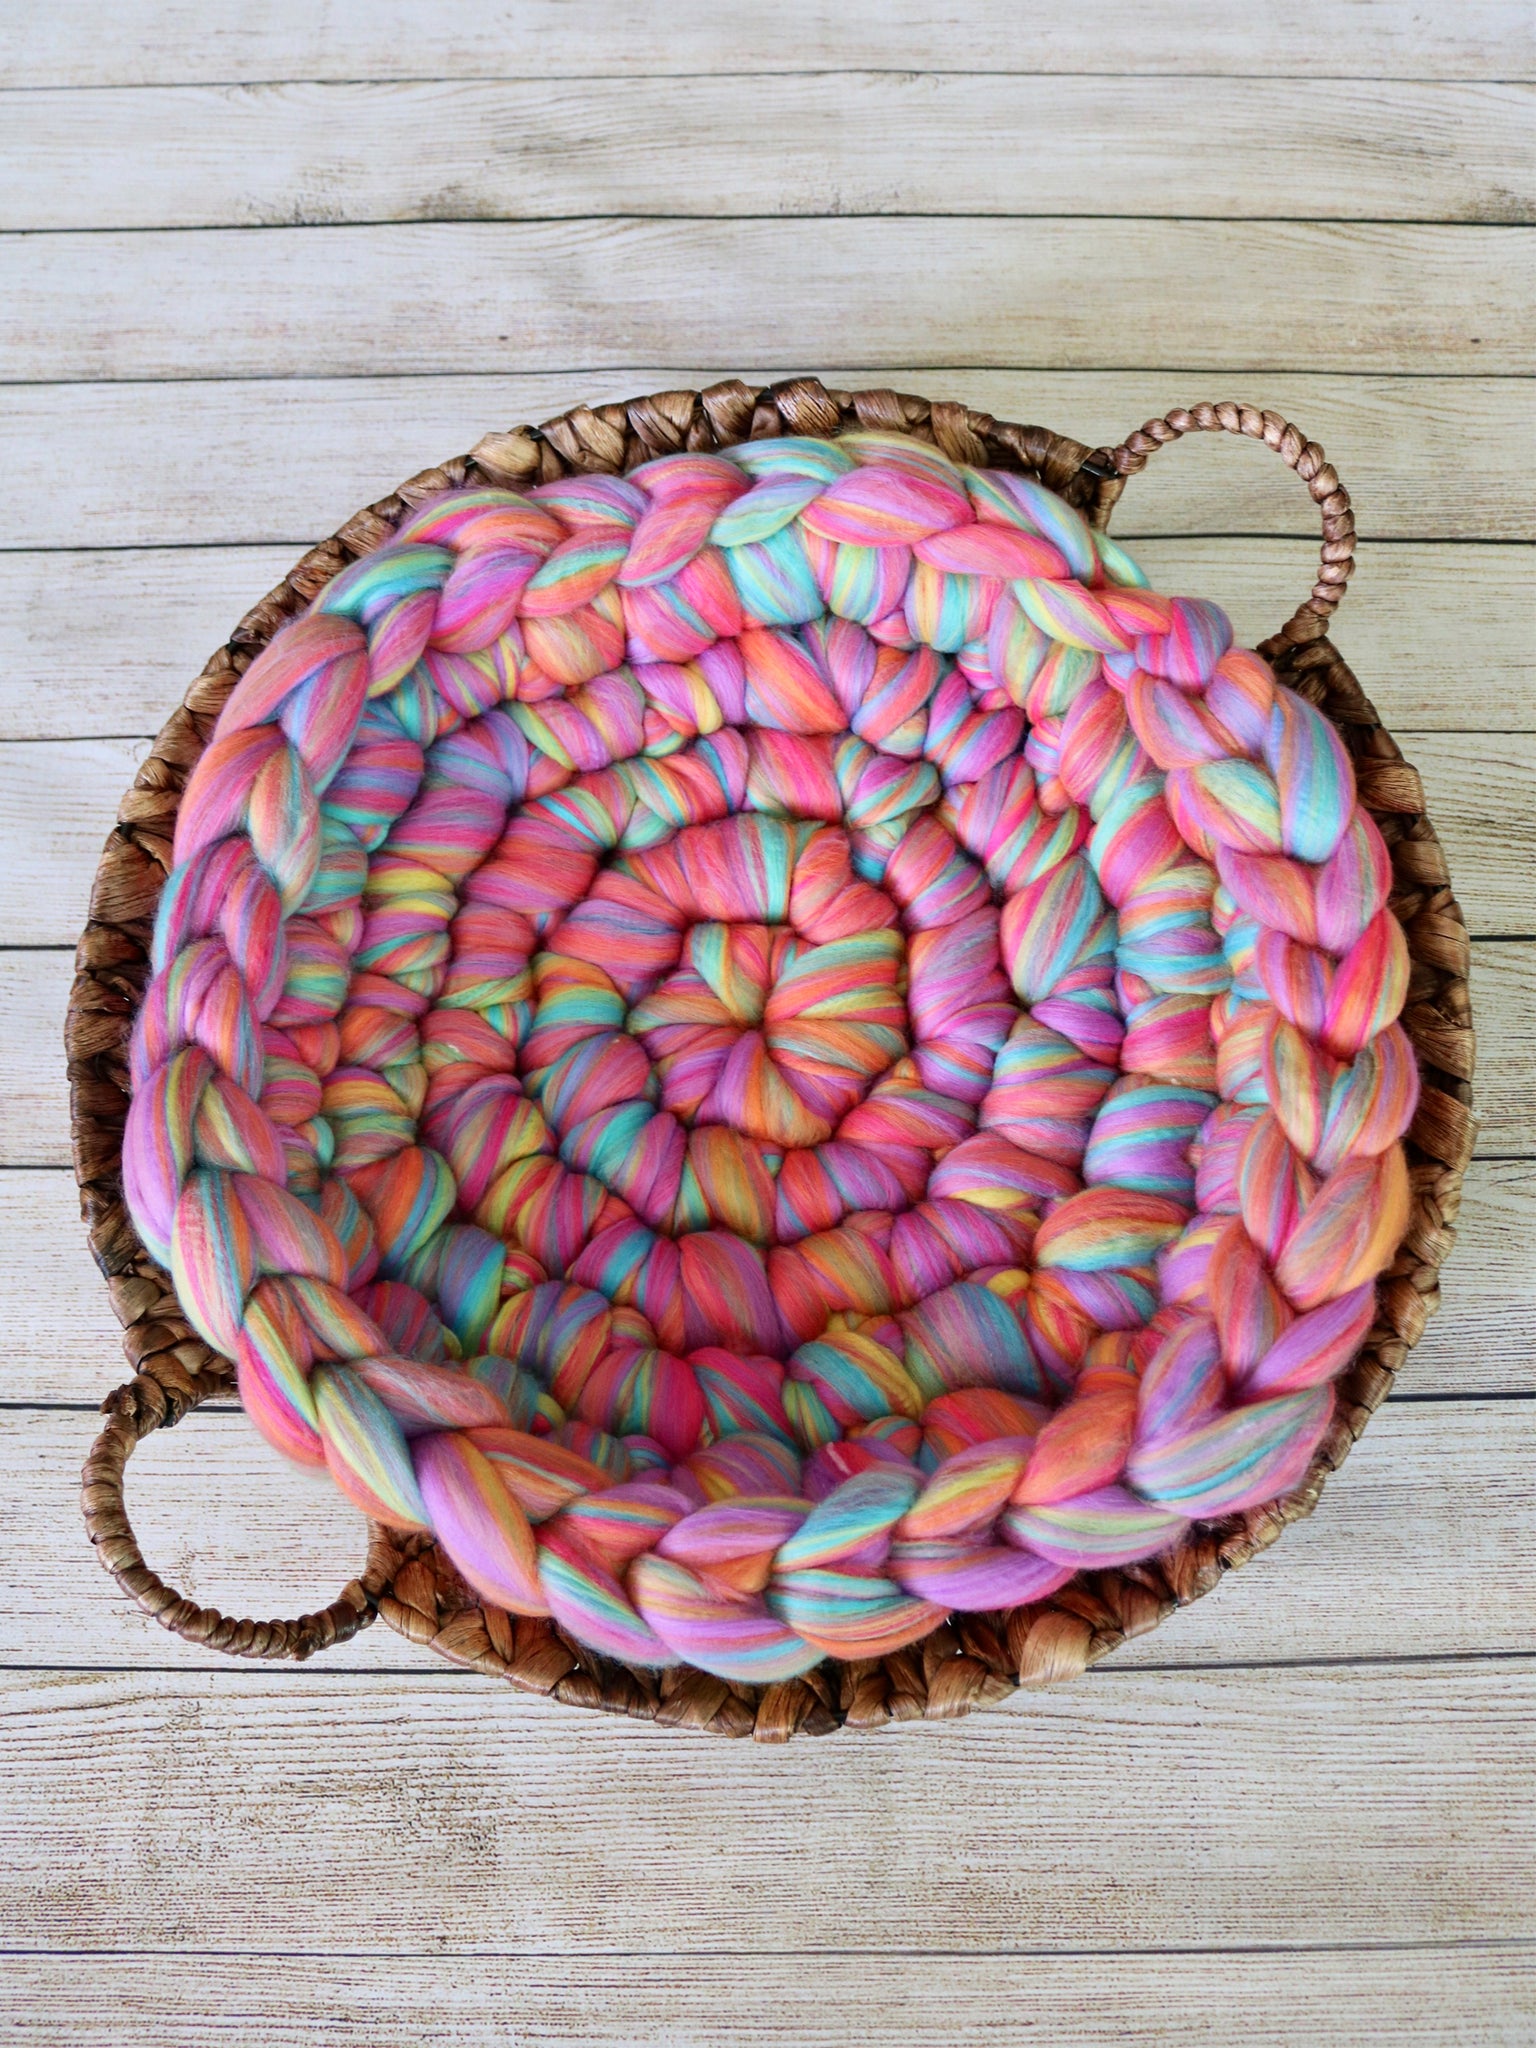 Bright rainbow newborn photo prop chunky round bump blanket by Two Seaside Babes